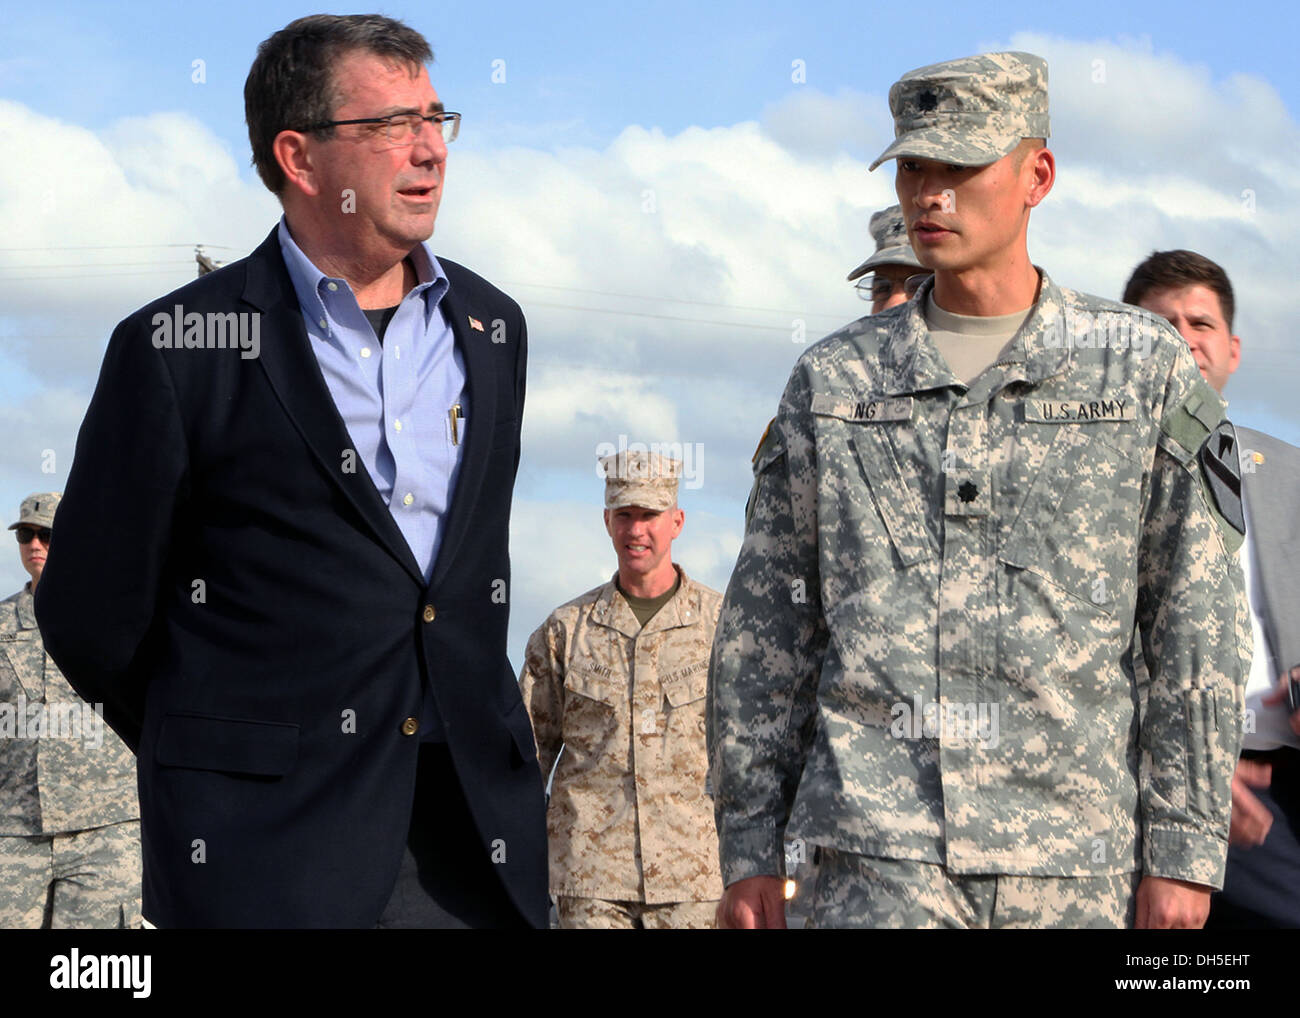 Lt. Col. Richard Ng (right), commander of the 1st 'Dragon' Battalion, 82nd Field Artillery Regiment, 1st 'Ironhorse' Brigade Combat Team, 1st Cavalry Division, speaks to Ashton Carter, the deputy secretary of defense, during his visit to the Dragon motor Stock Photo